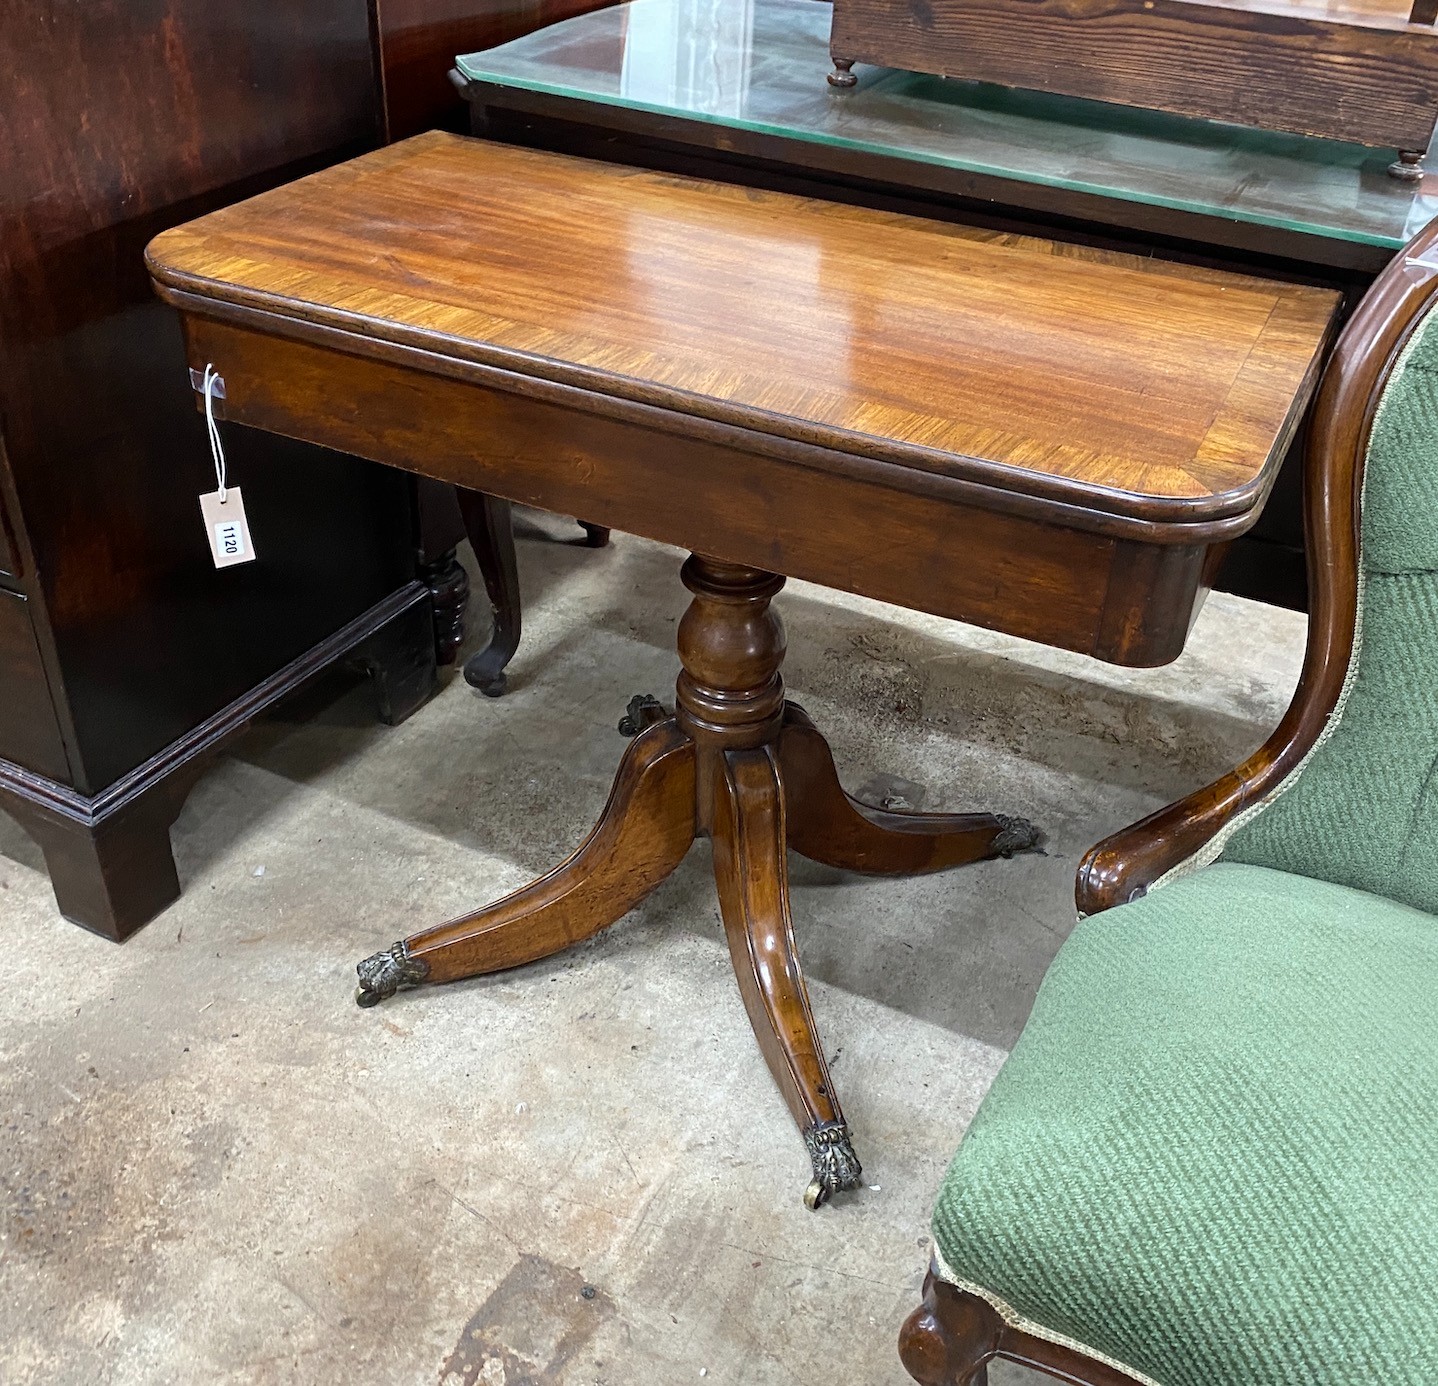 A Regency rosewood banded rectangular mahogany folding tea table, width 92cm, depth 45cm, height 73cm *Please note the sale commences at 9am.